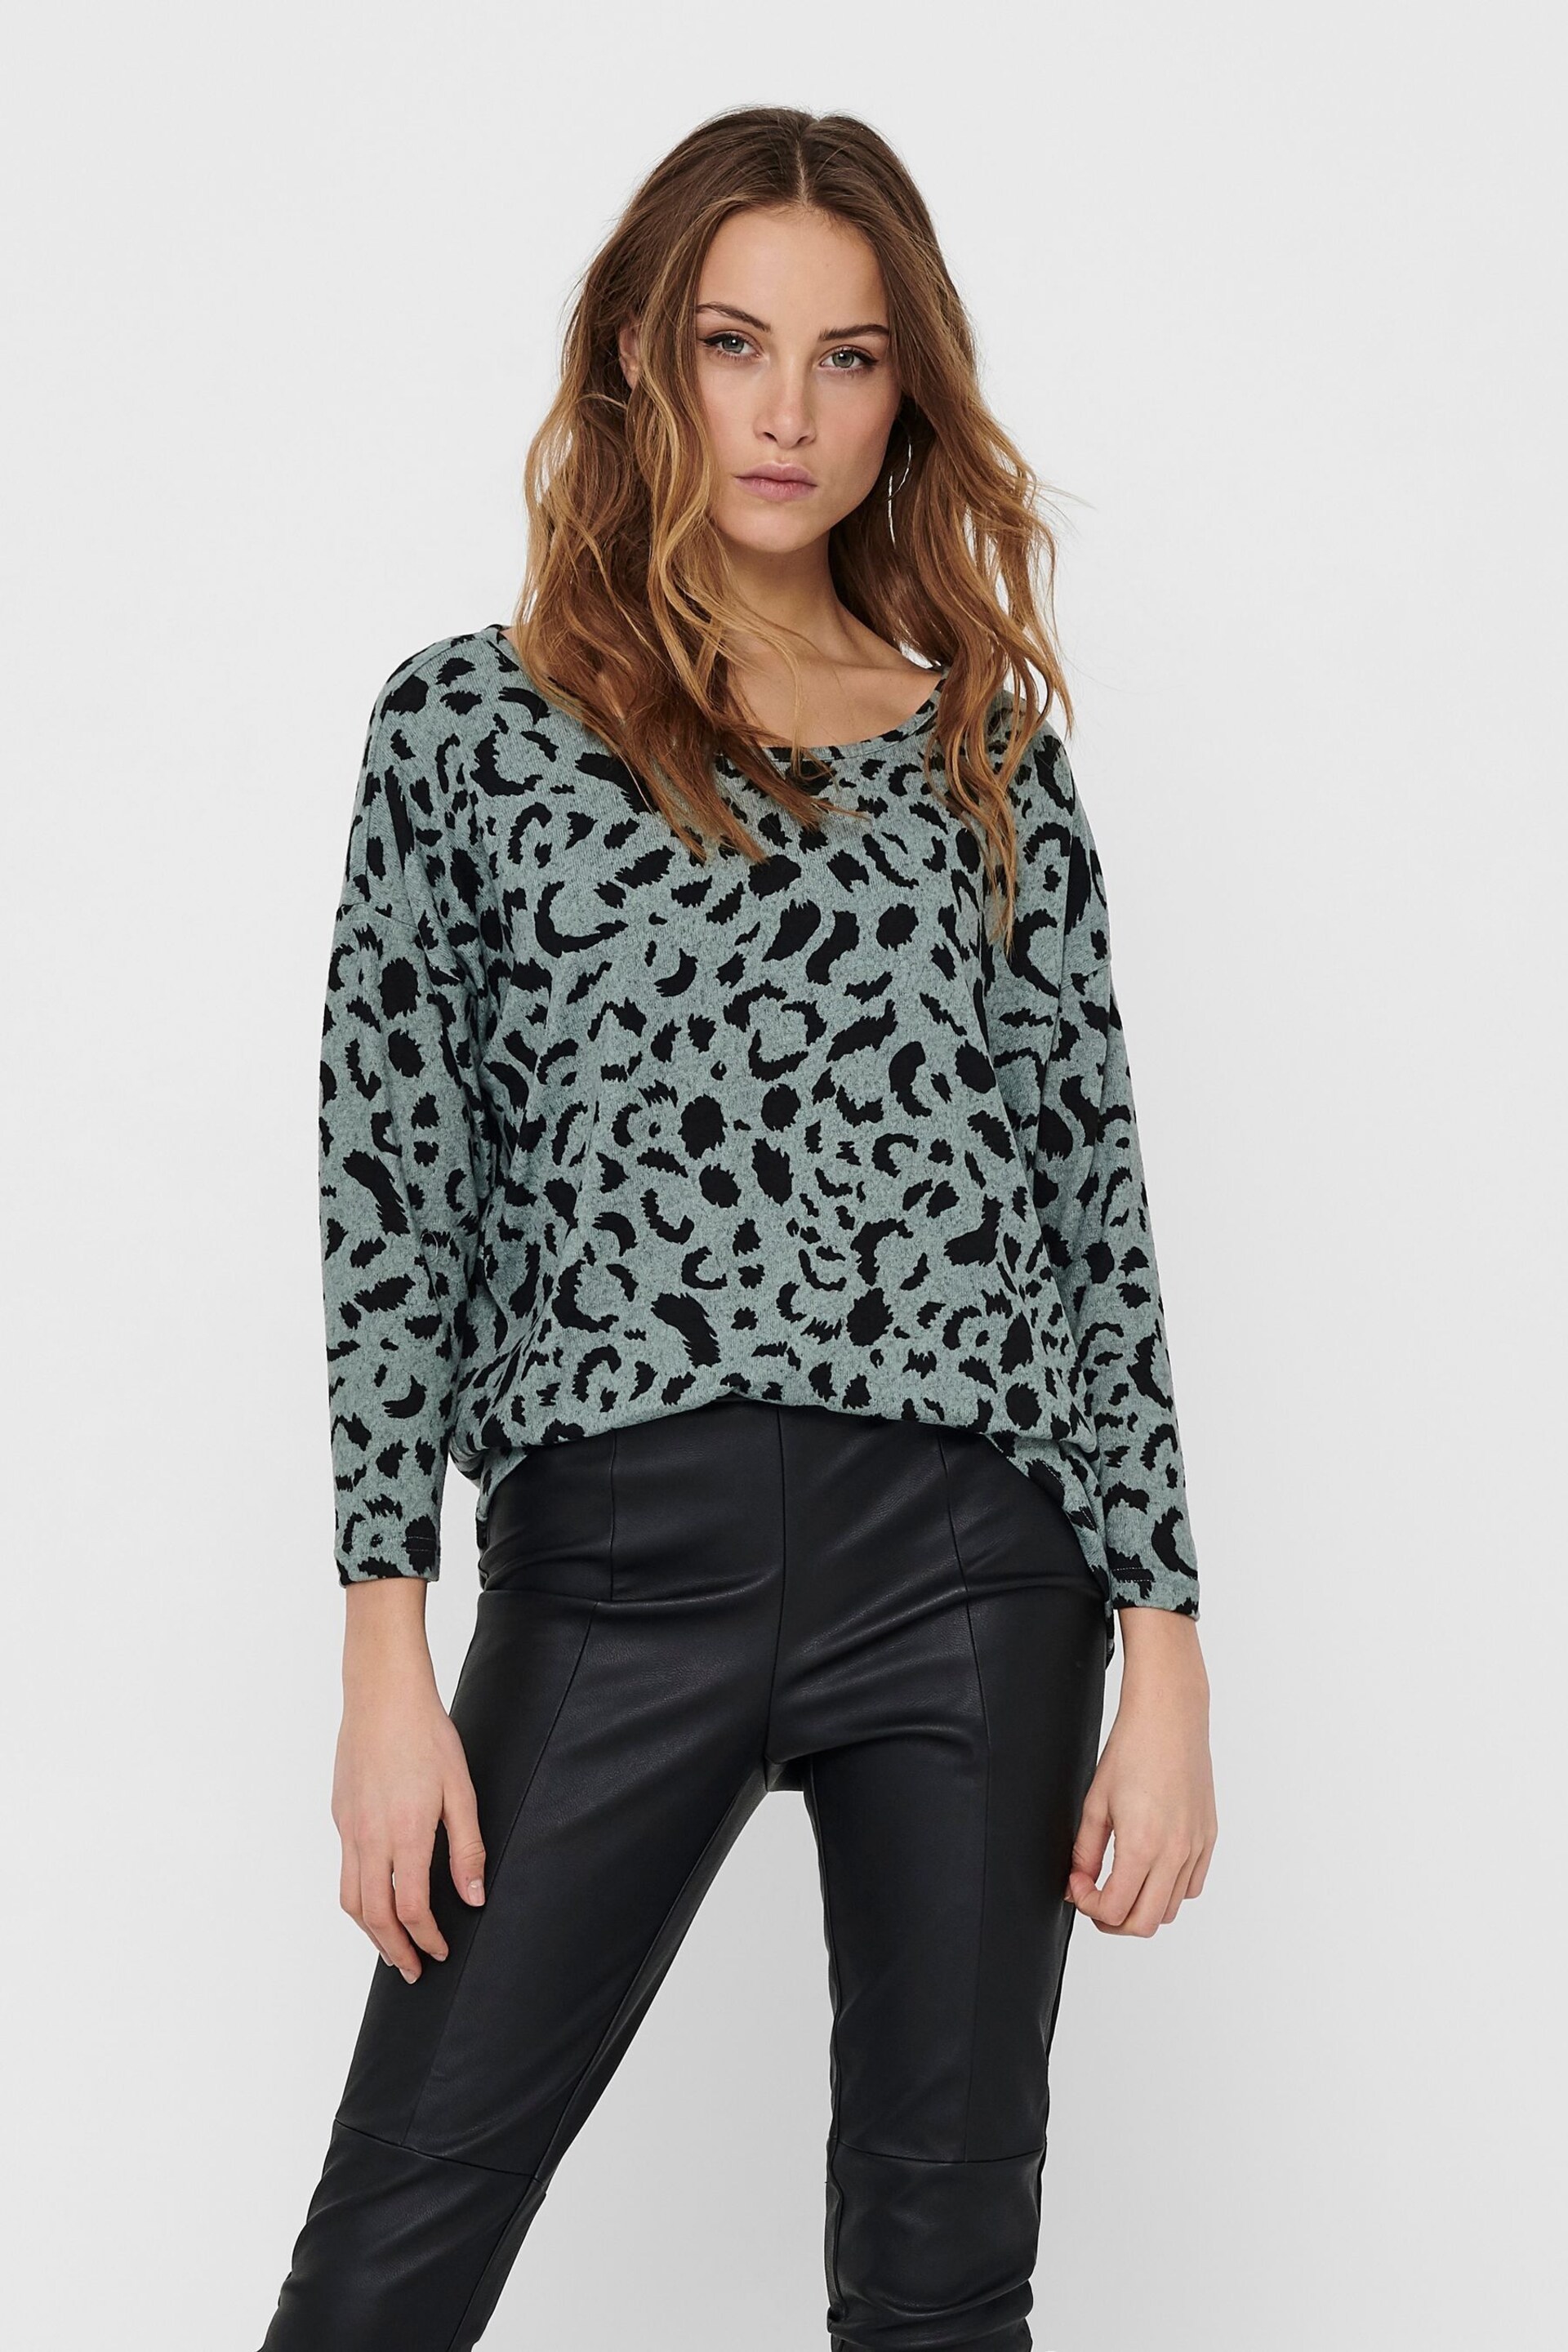 ONLY Green Lightweight Knit Printed Jumper - Image 1 of 5